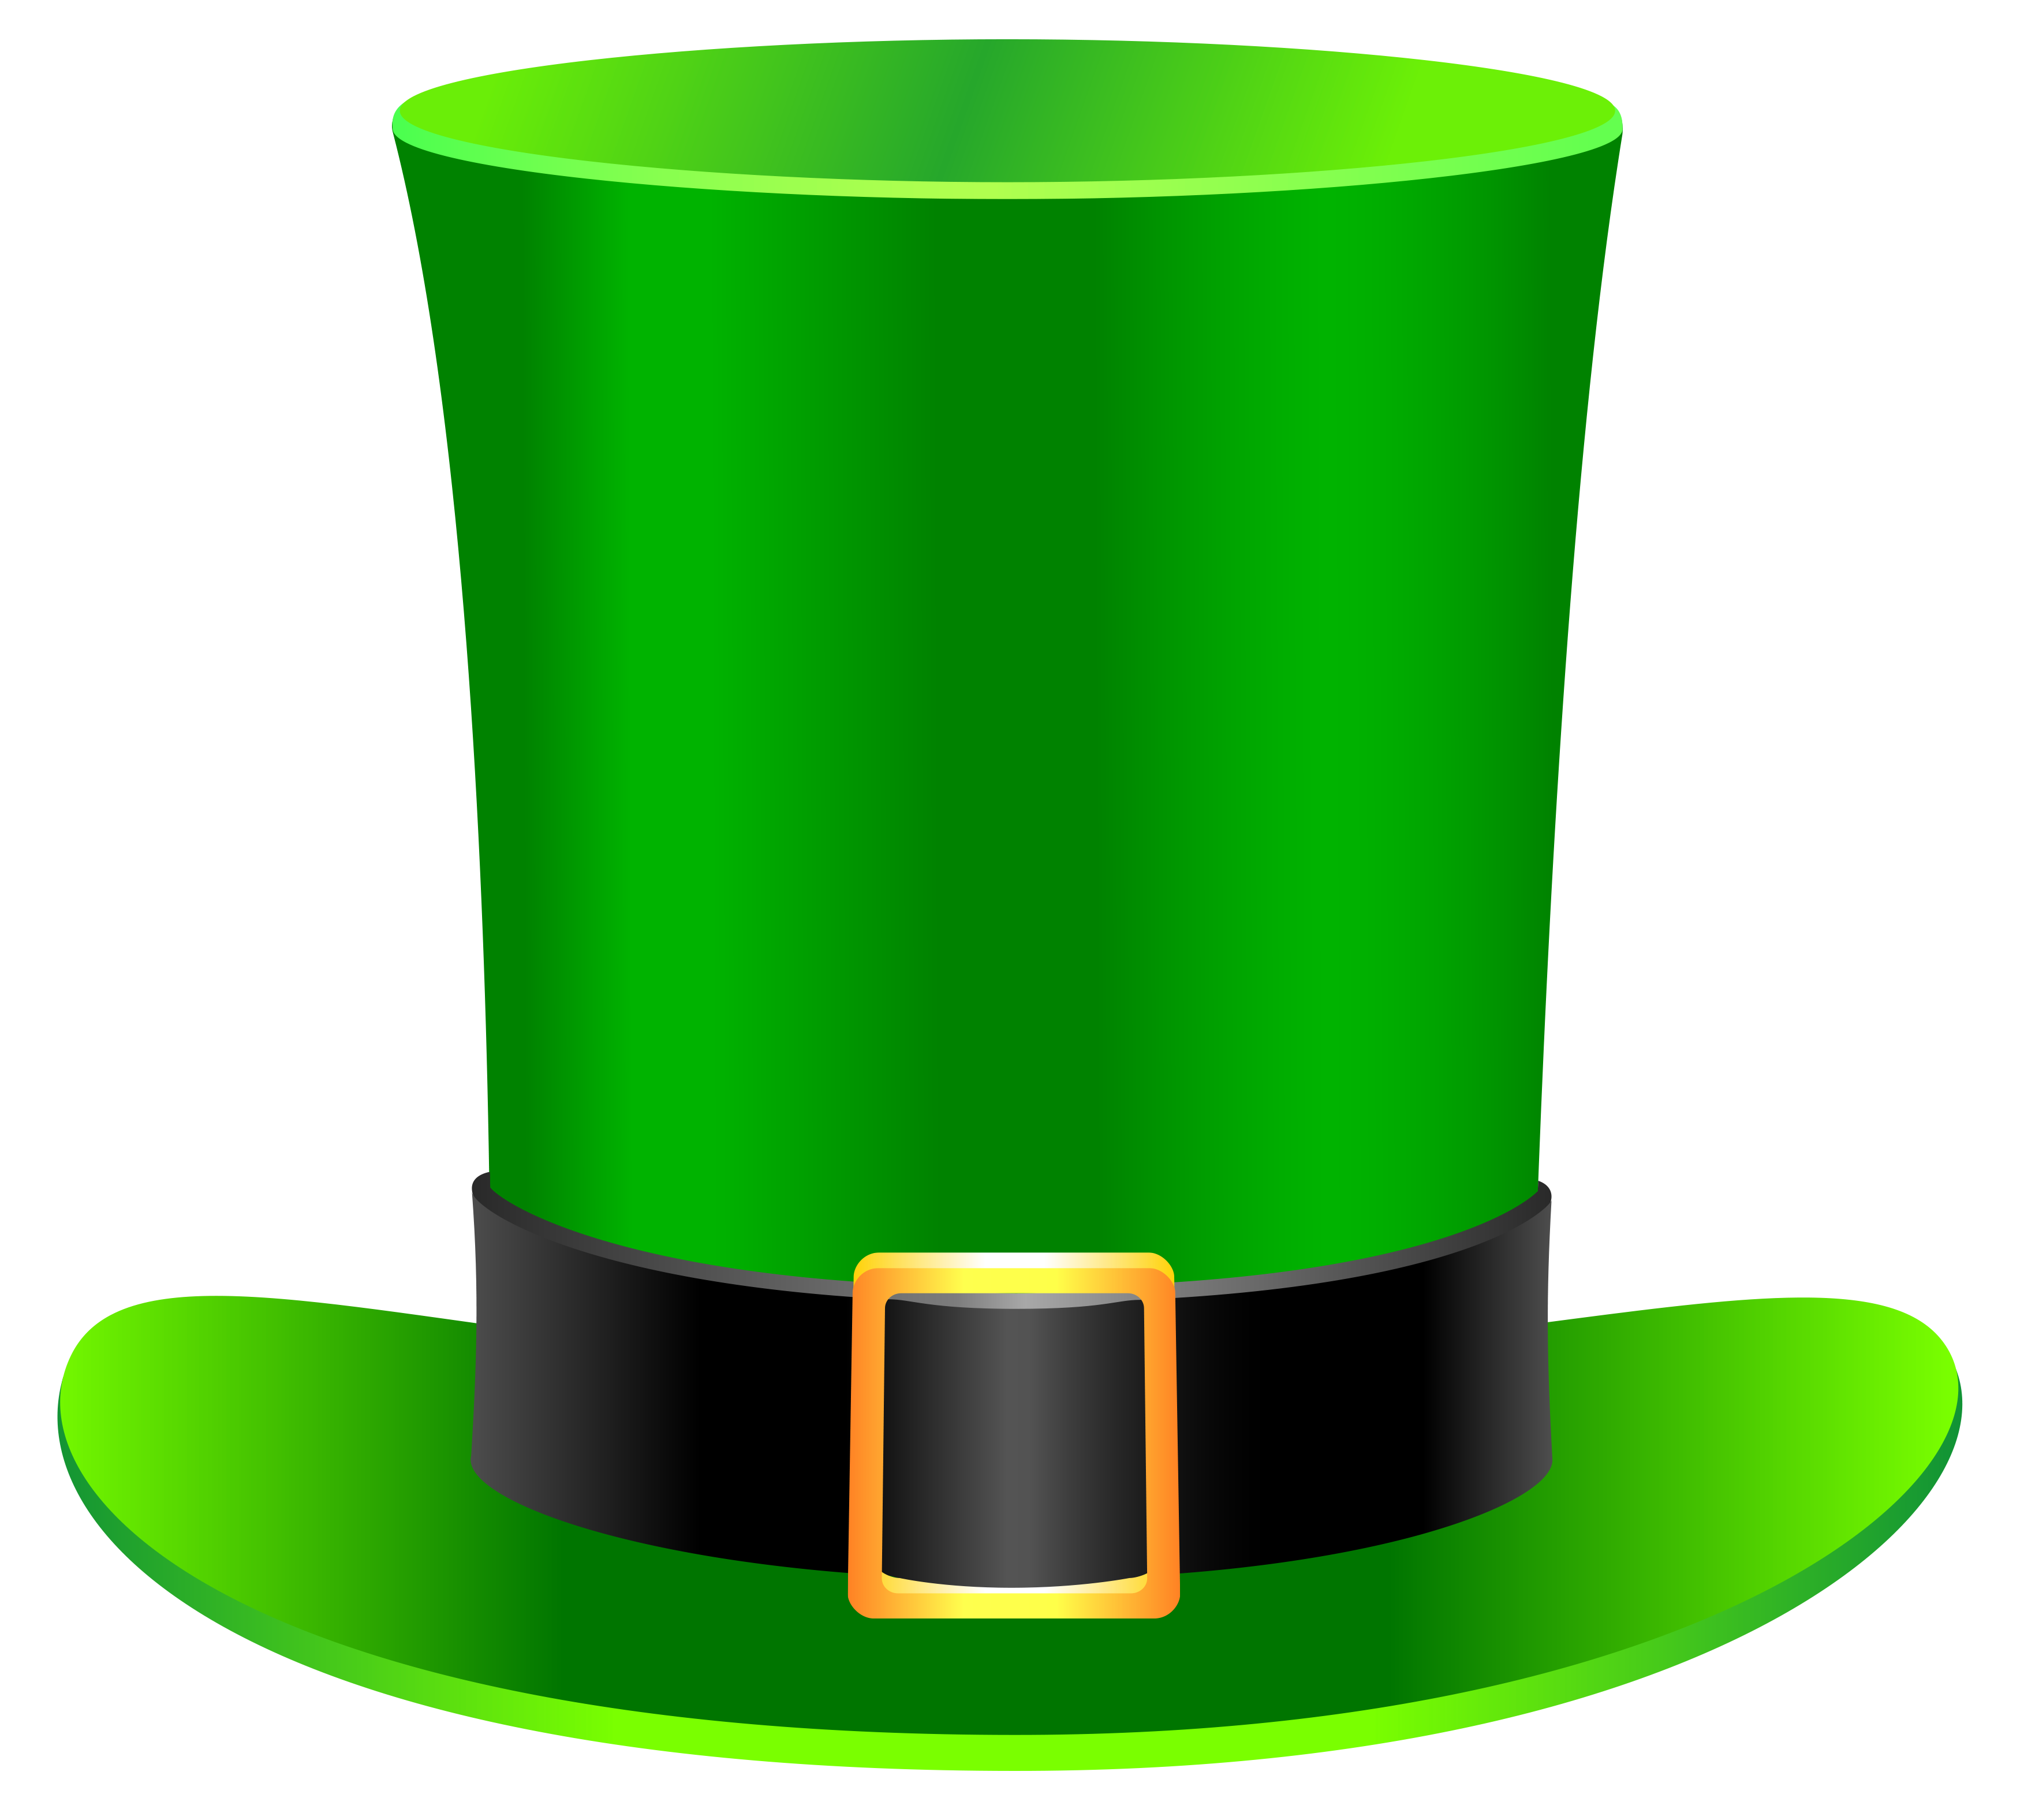 Download St Patrick Day Leprechaun Hat PNG Image for Free